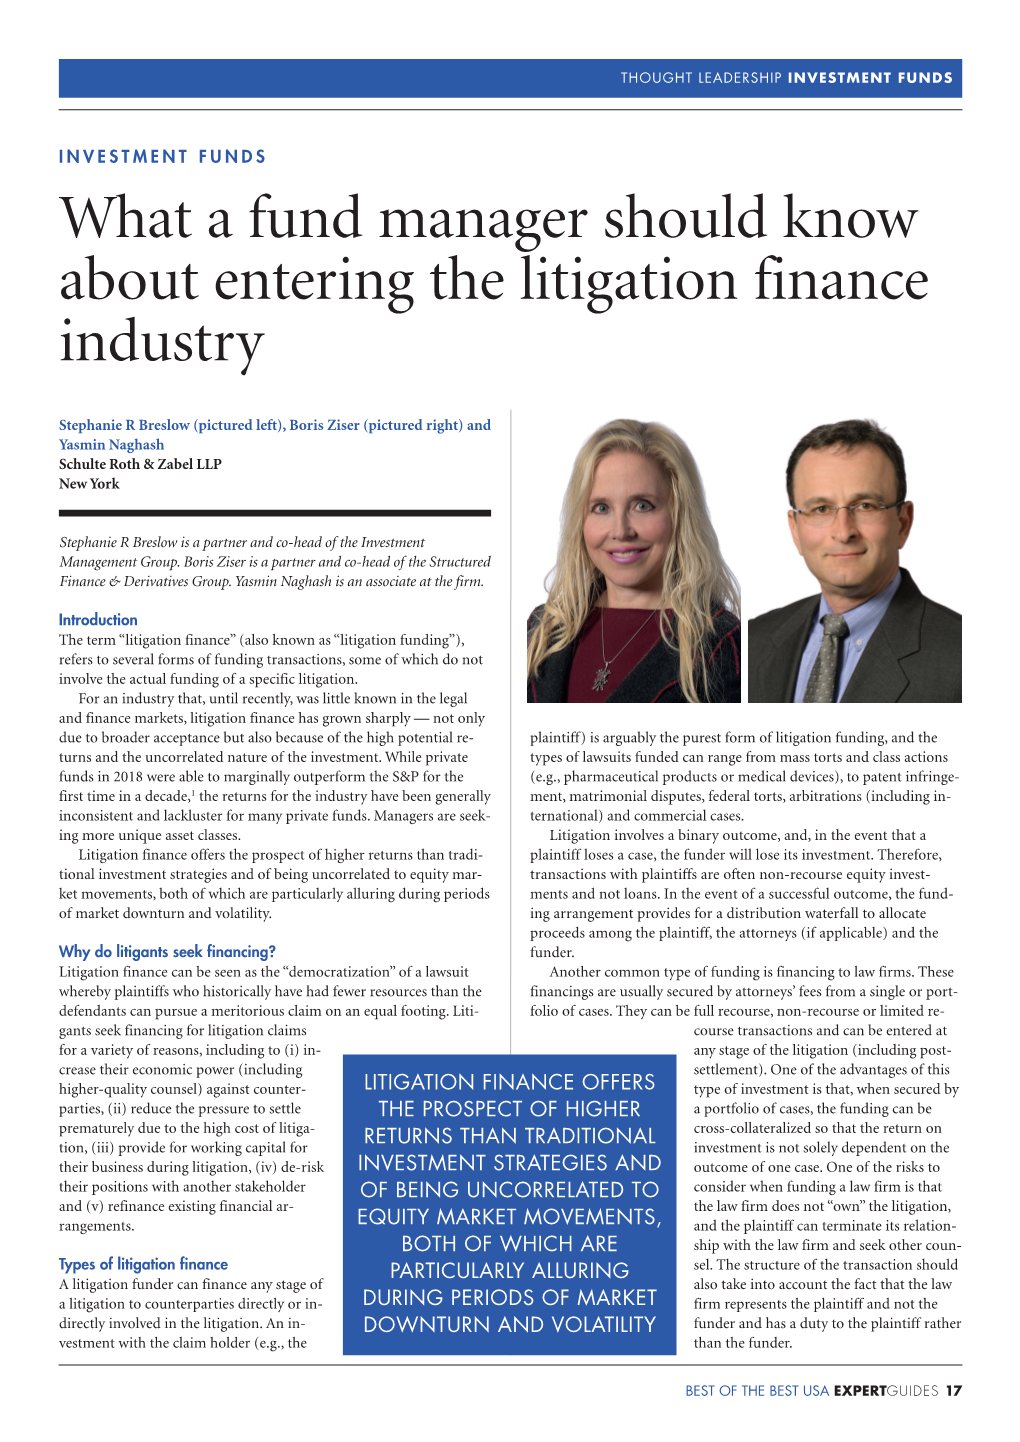 What a Fund Manager Should Know About Entering the Litigation Finance Industry